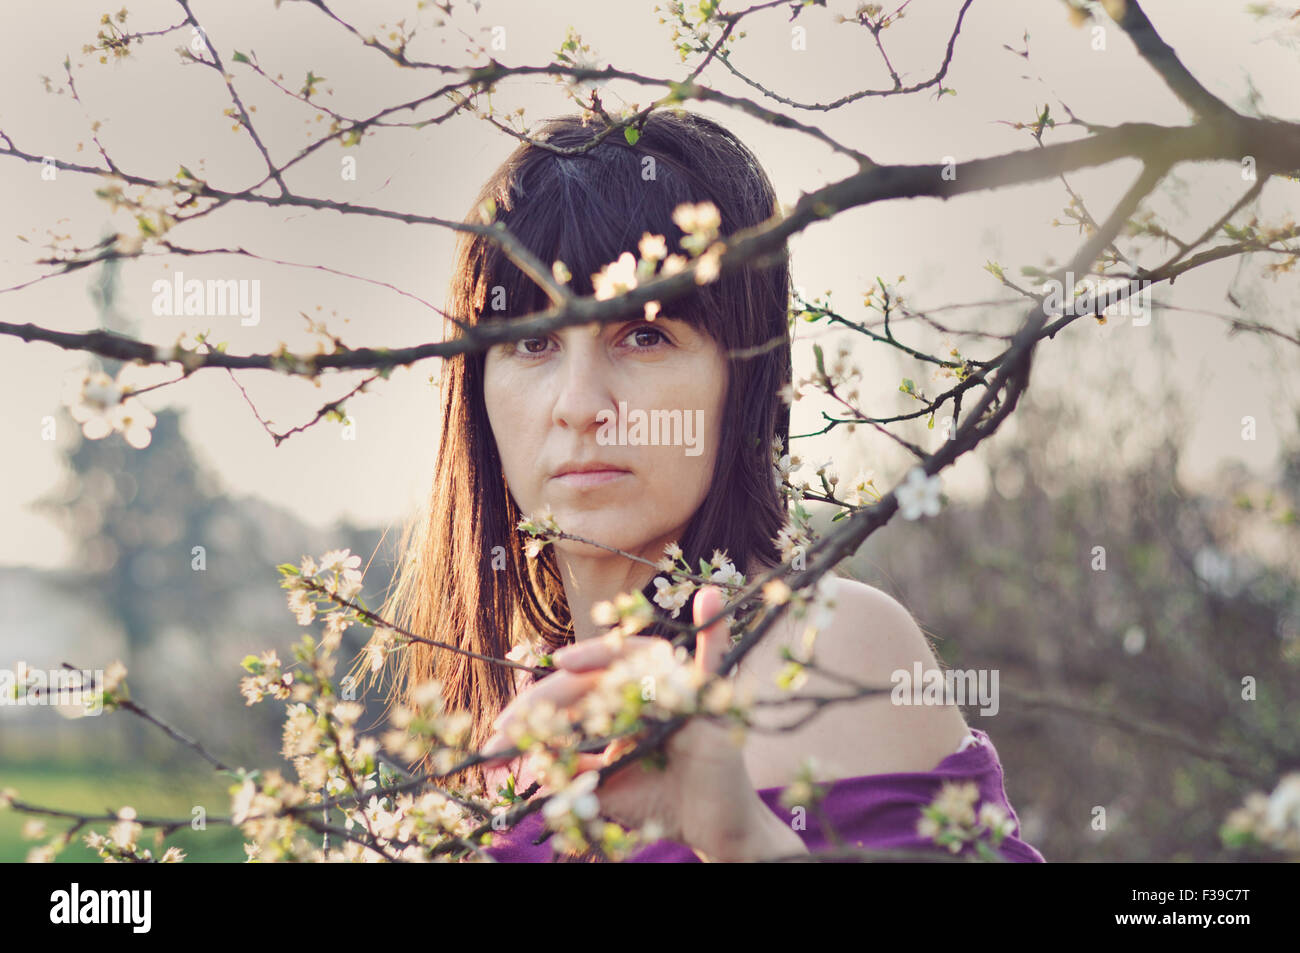 Serious mid adult woman portrait, spring Stock Photo